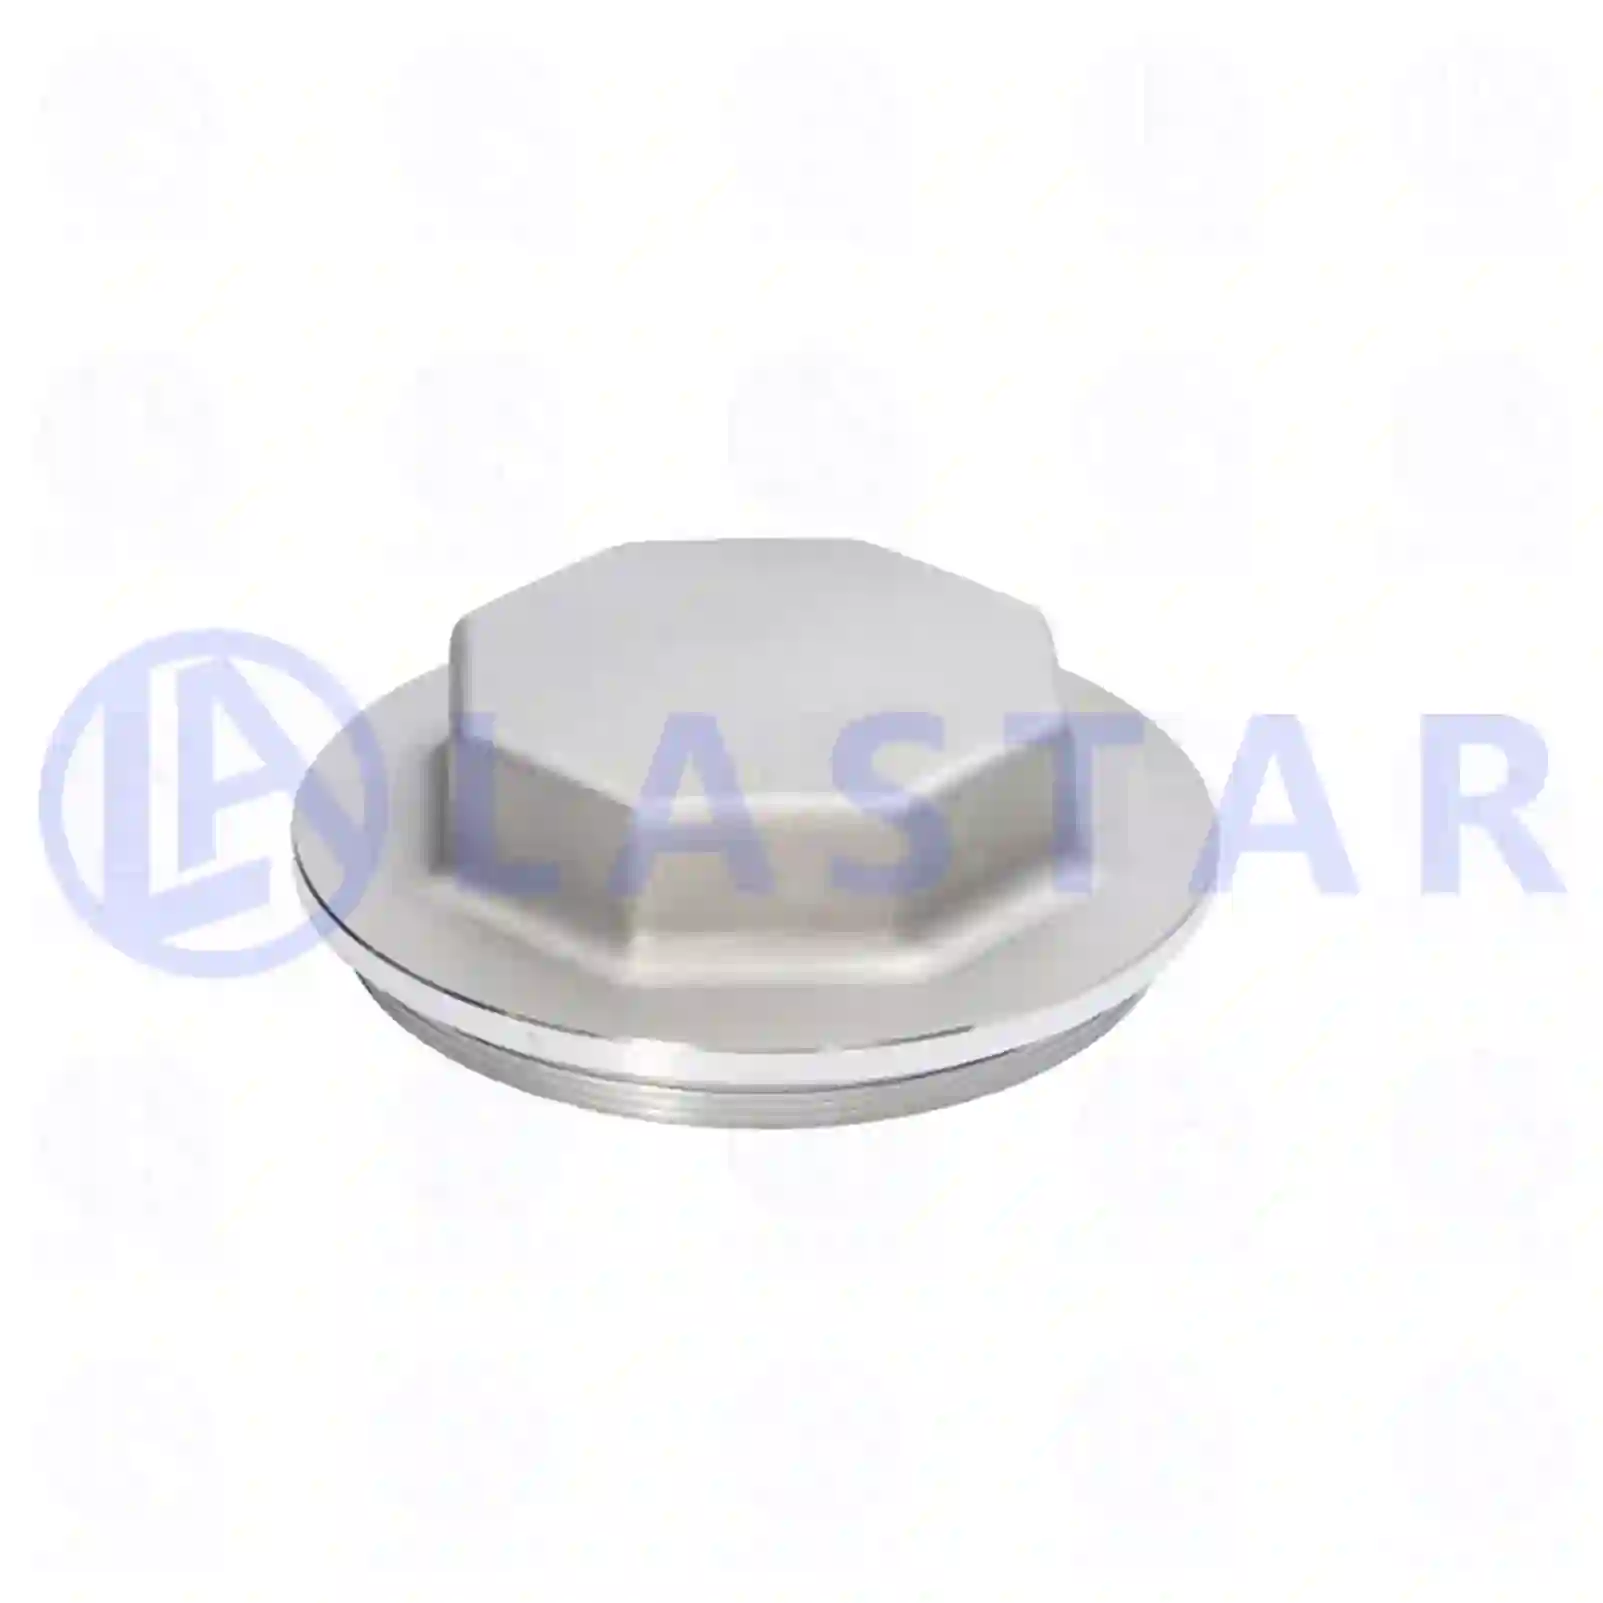 Hub cover, complete with o-ring, 77726935, 1864221, ZG30061-0008 ||  77726935 Lastar Spare Part | Truck Spare Parts, Auotomotive Spare Parts Hub cover, complete with o-ring, 77726935, 1864221, ZG30061-0008 ||  77726935 Lastar Spare Part | Truck Spare Parts, Auotomotive Spare Parts